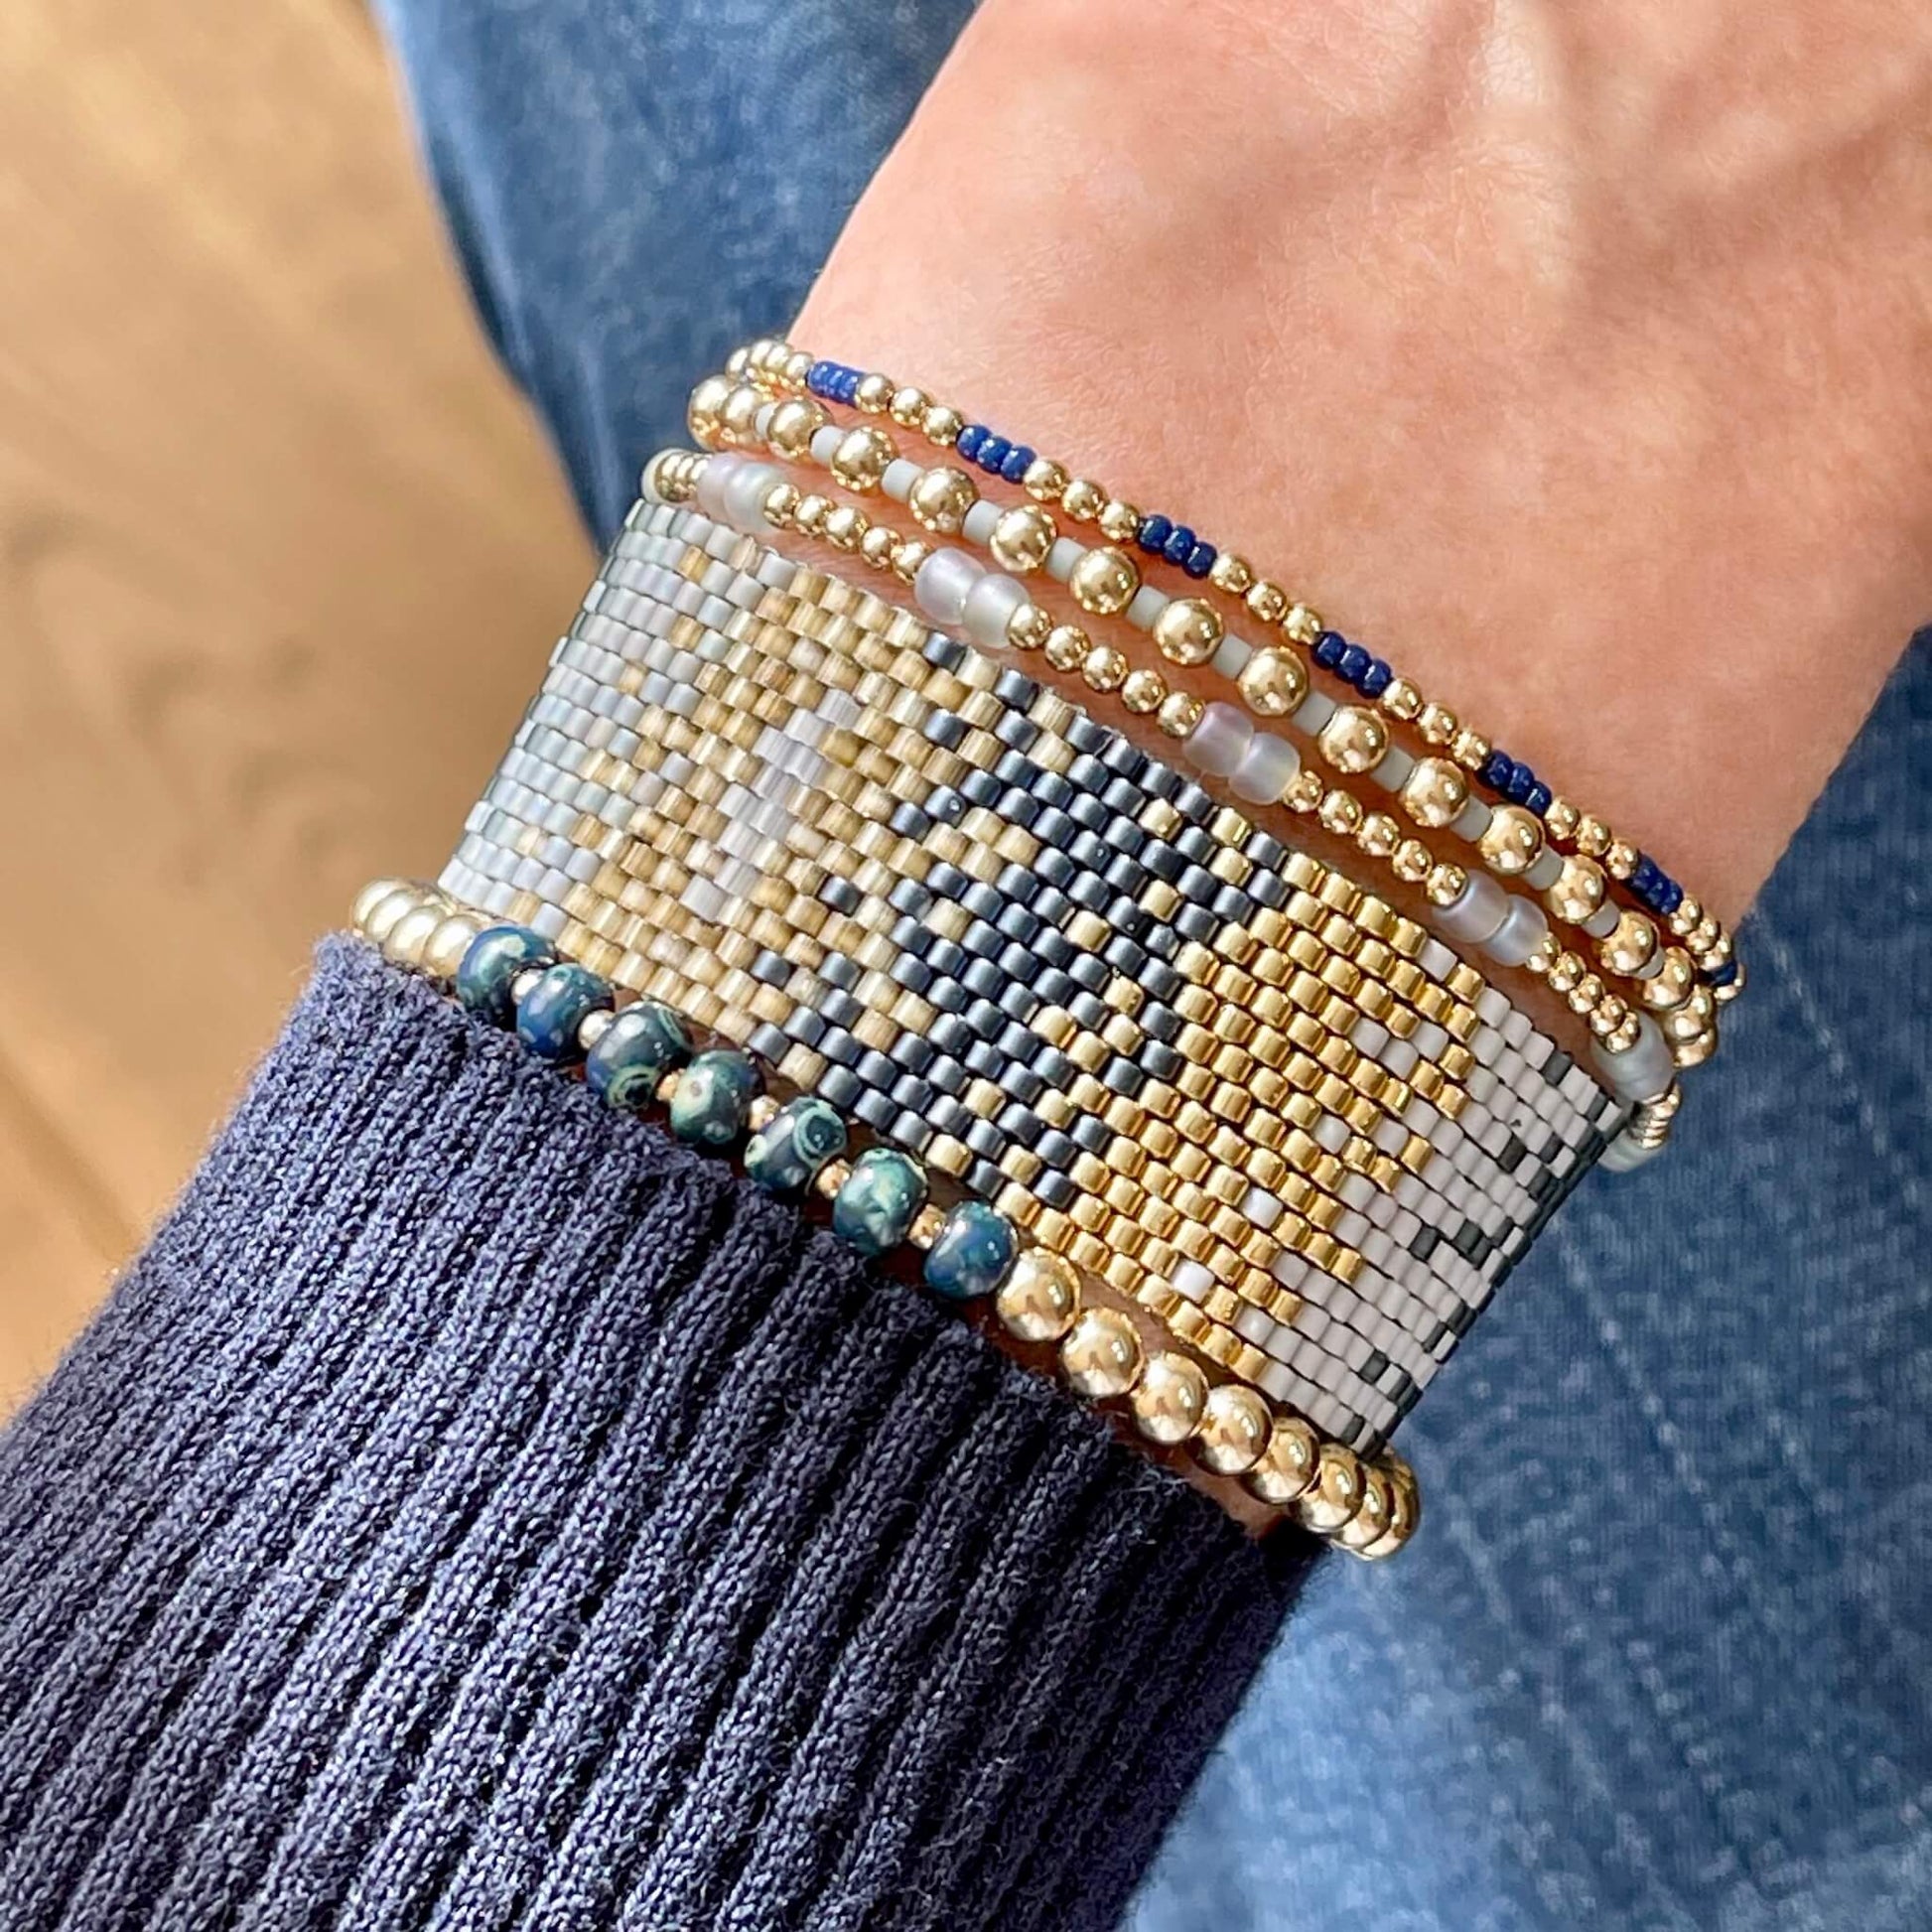 Navy ombre beaded cuff with gold, blue, and gray stetch bracelets.